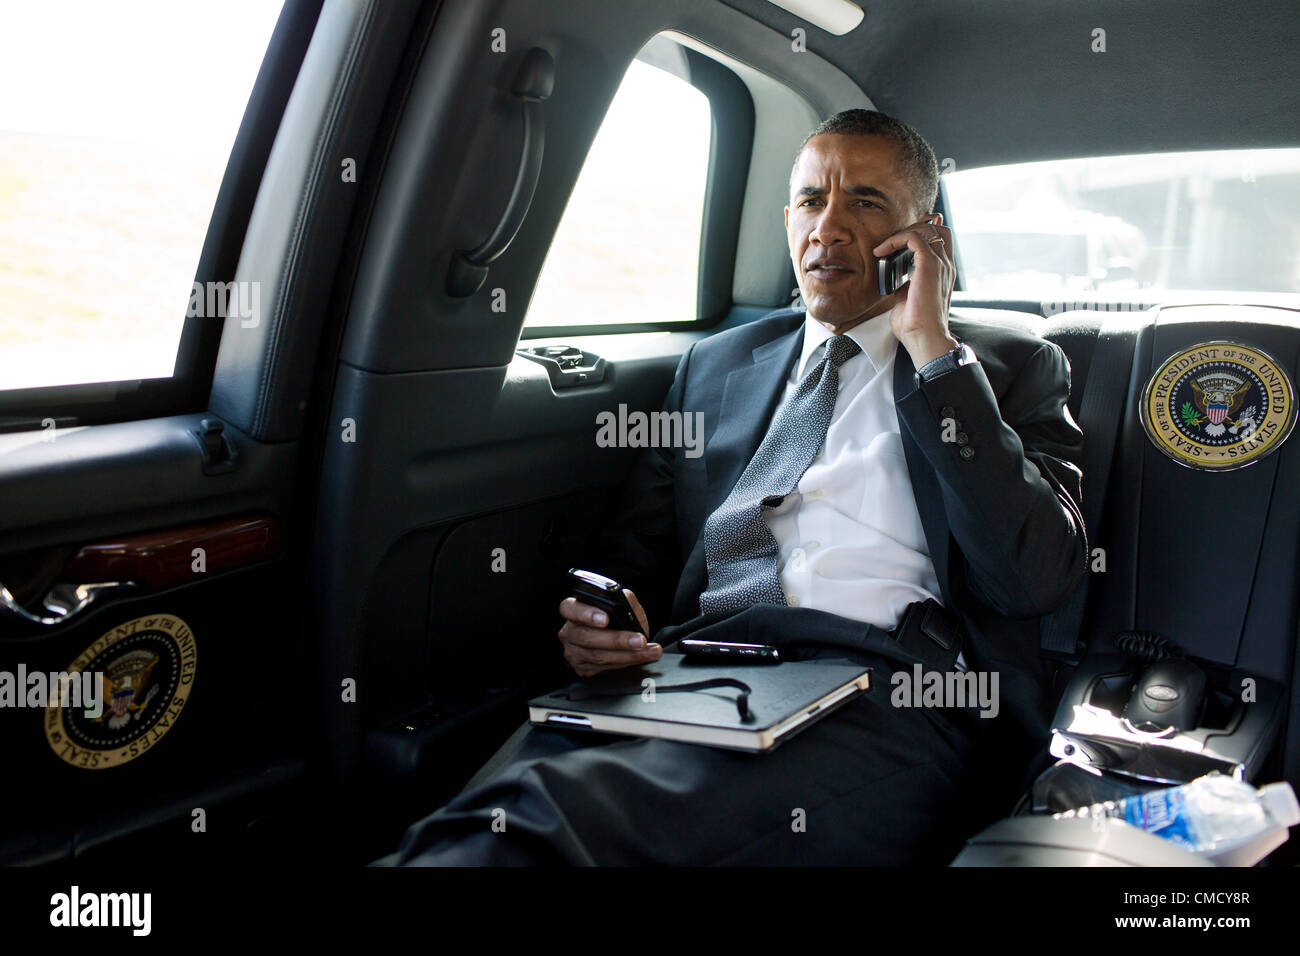 US President Barack Obama talks on the phone with Aurora Mayor Steve Hogan during the motorcade ride to Palm Beach International Airport July 20, 2012 in Palm Beach, FL. The President called Mayor Hogan to offer his condolences and support to the Aurora community following the tragic shooting at a movie theater. Stock Photo